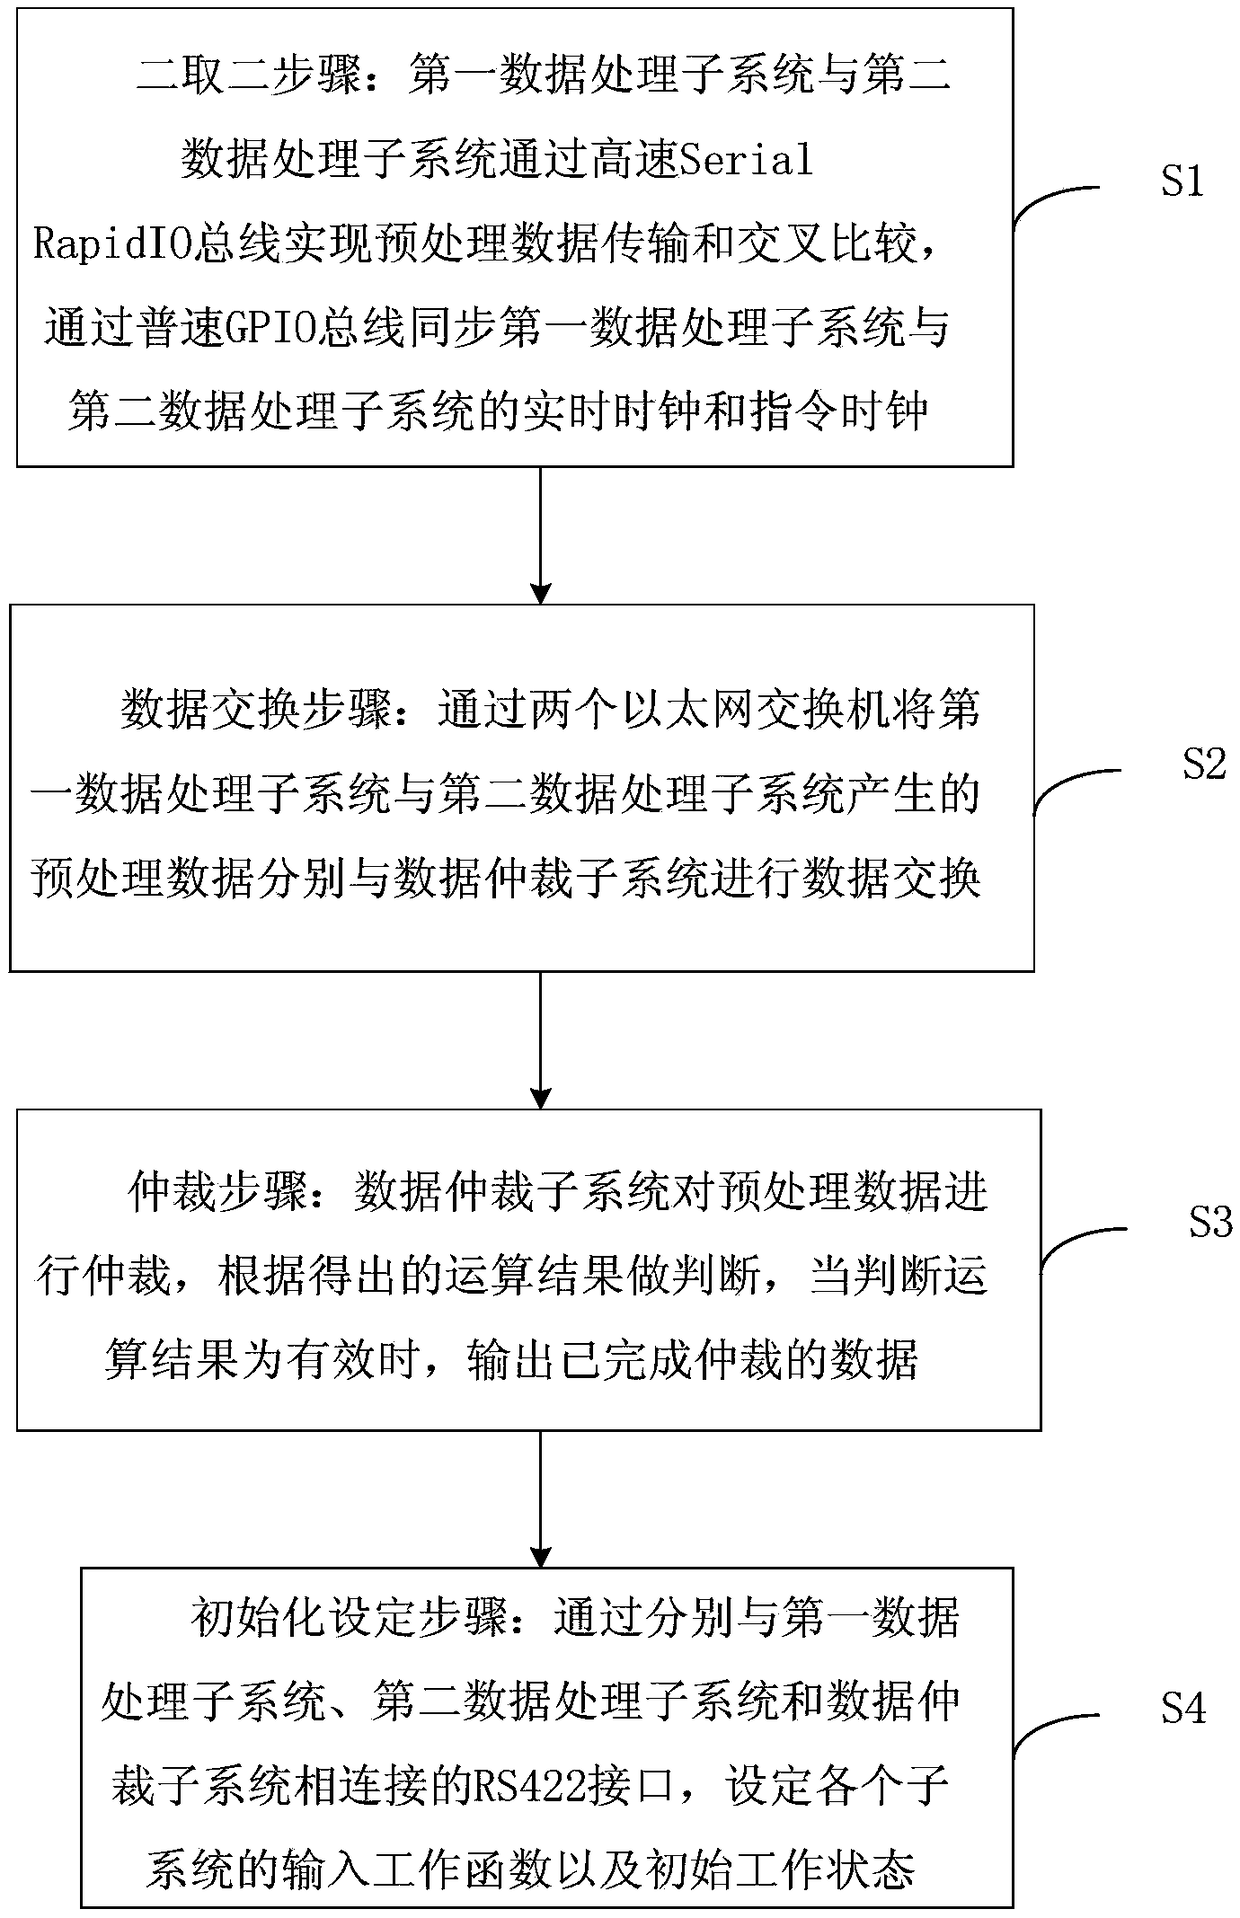 Two-out-of-two security data processing and arbitration apparatus and method